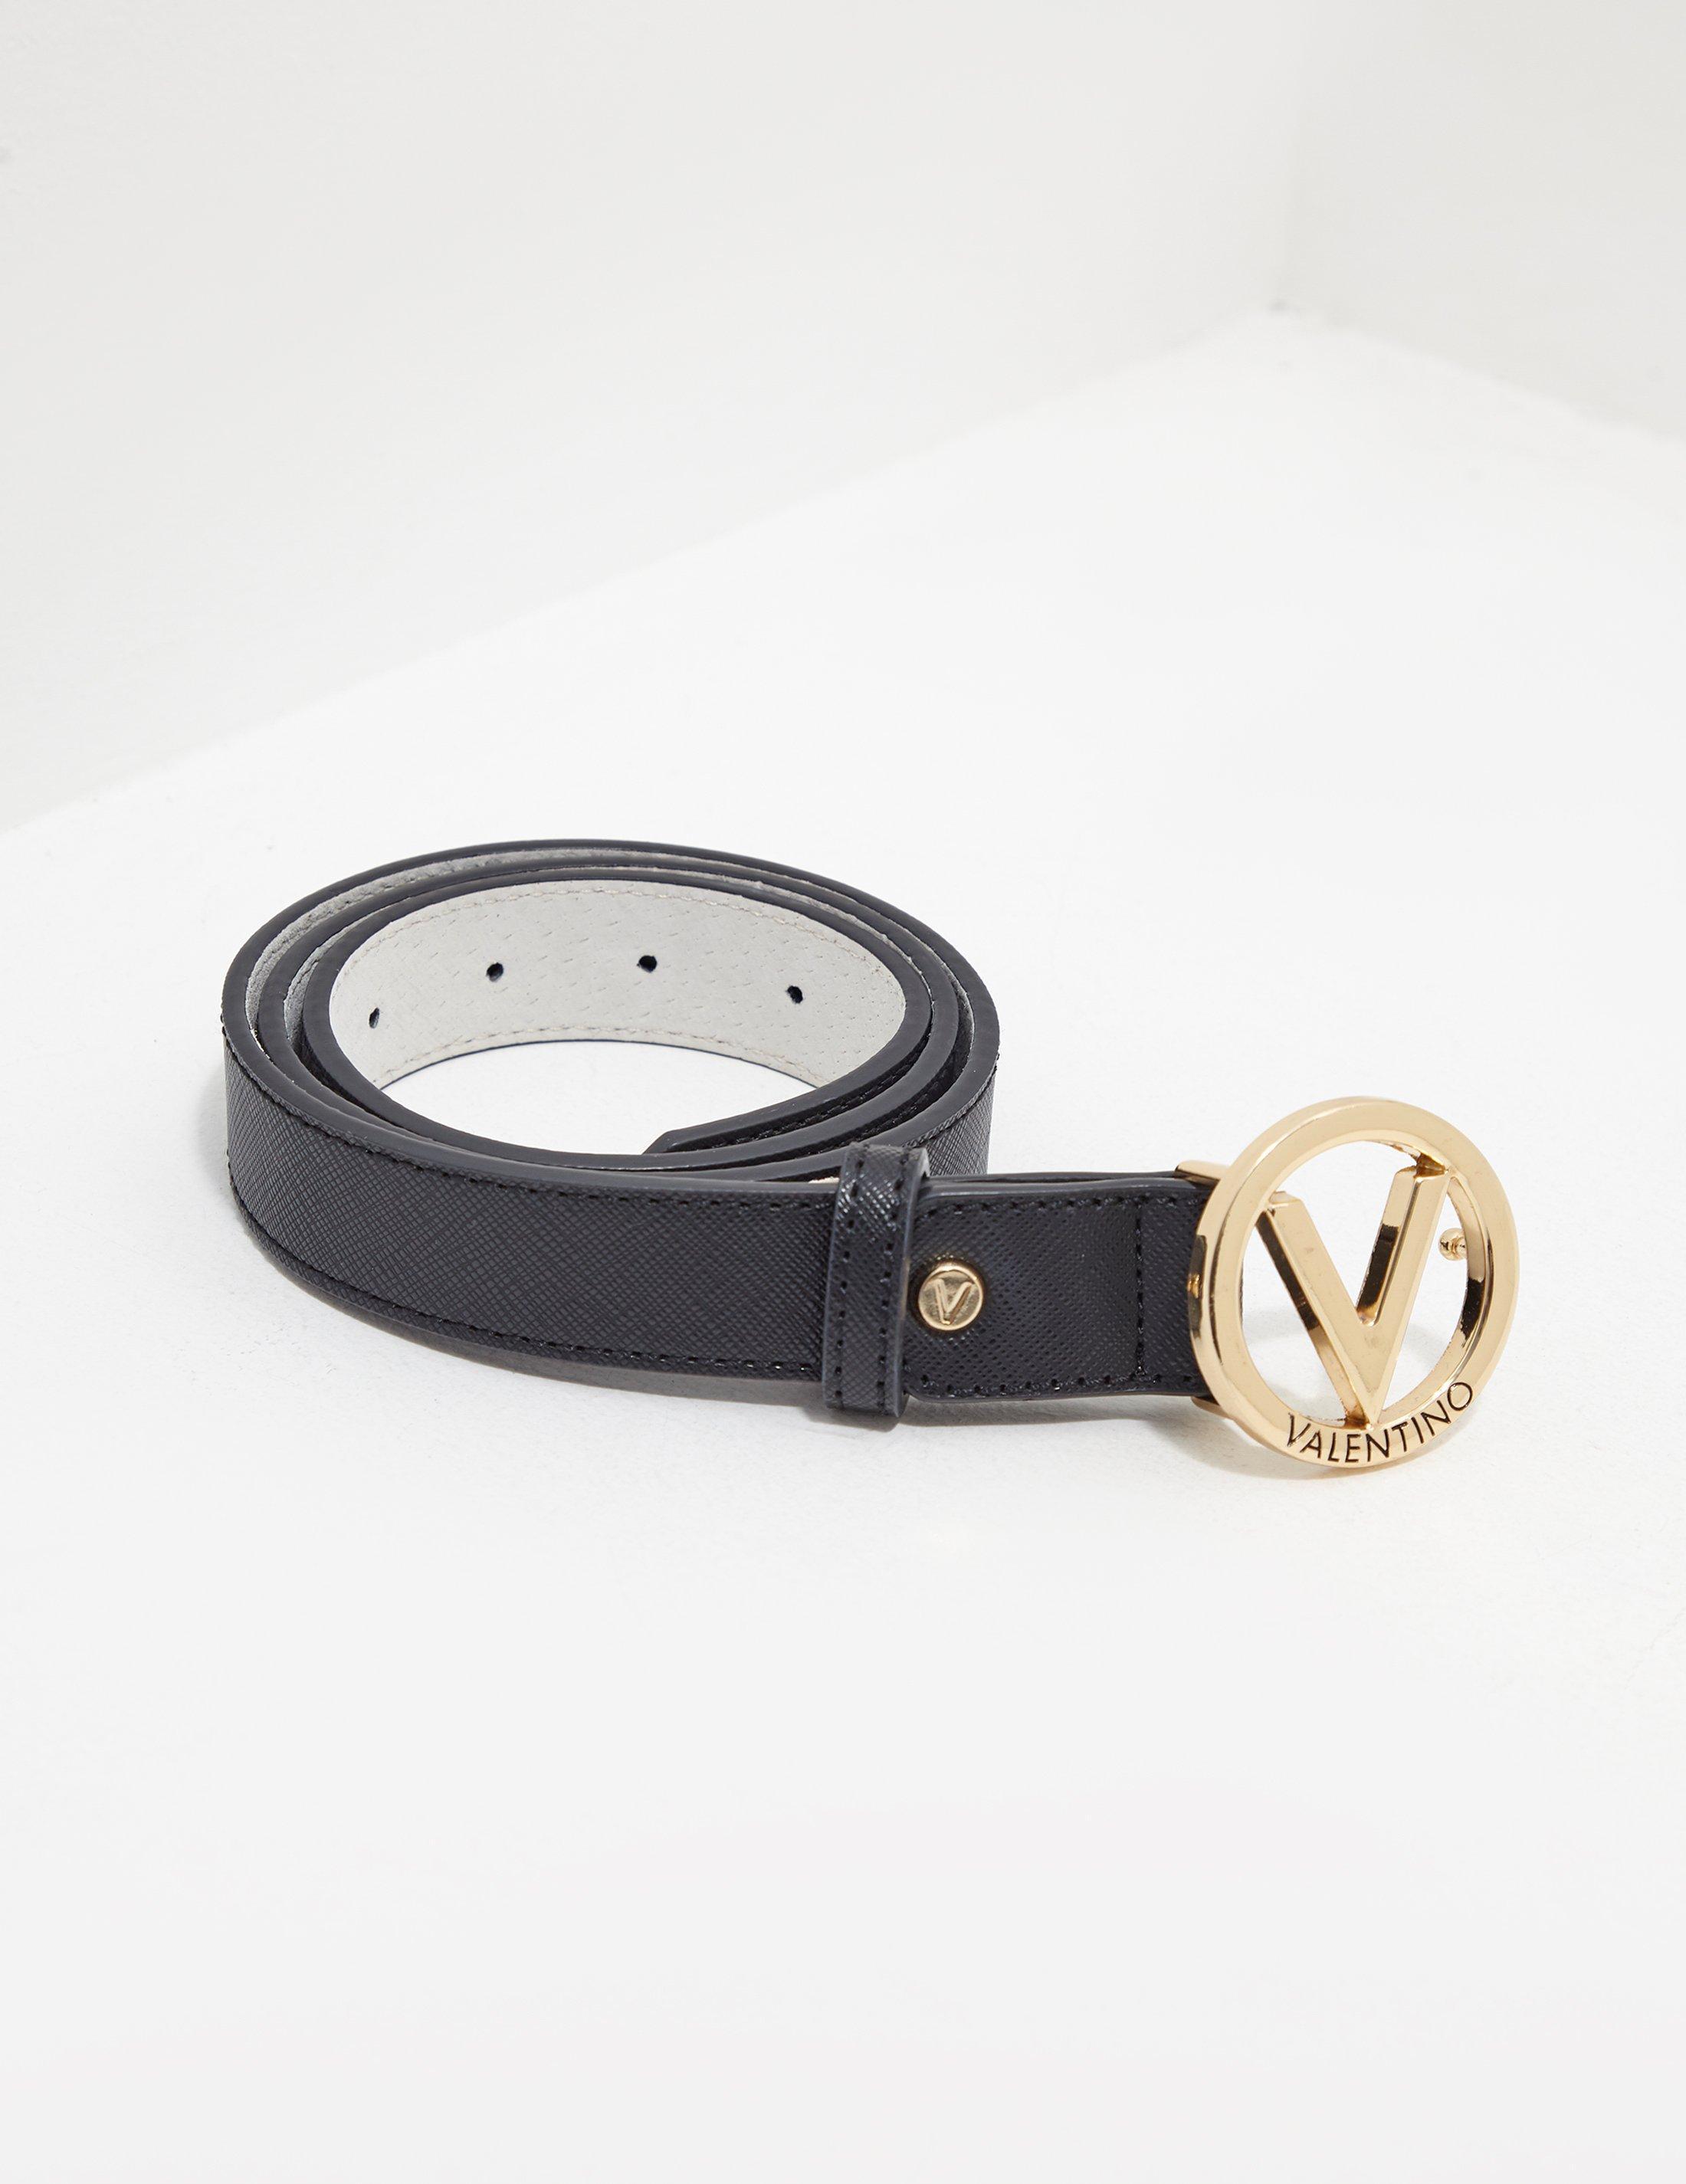 valentino by mario valentino belt,Limited Time Offer,slabrealty.com